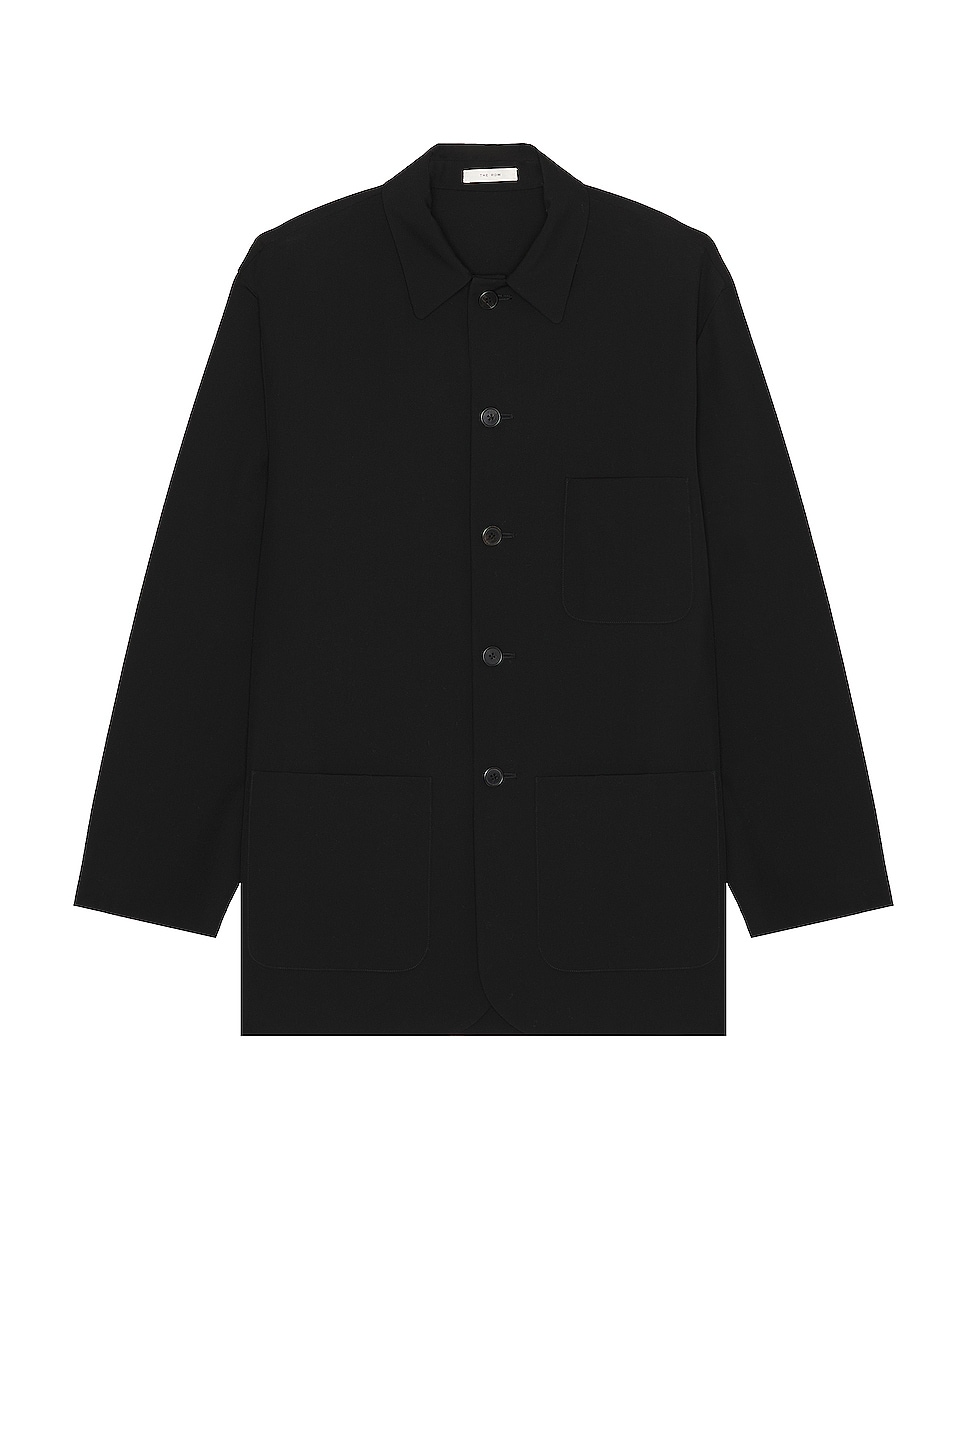 Image 1 of The Row Casey Shirt in Black